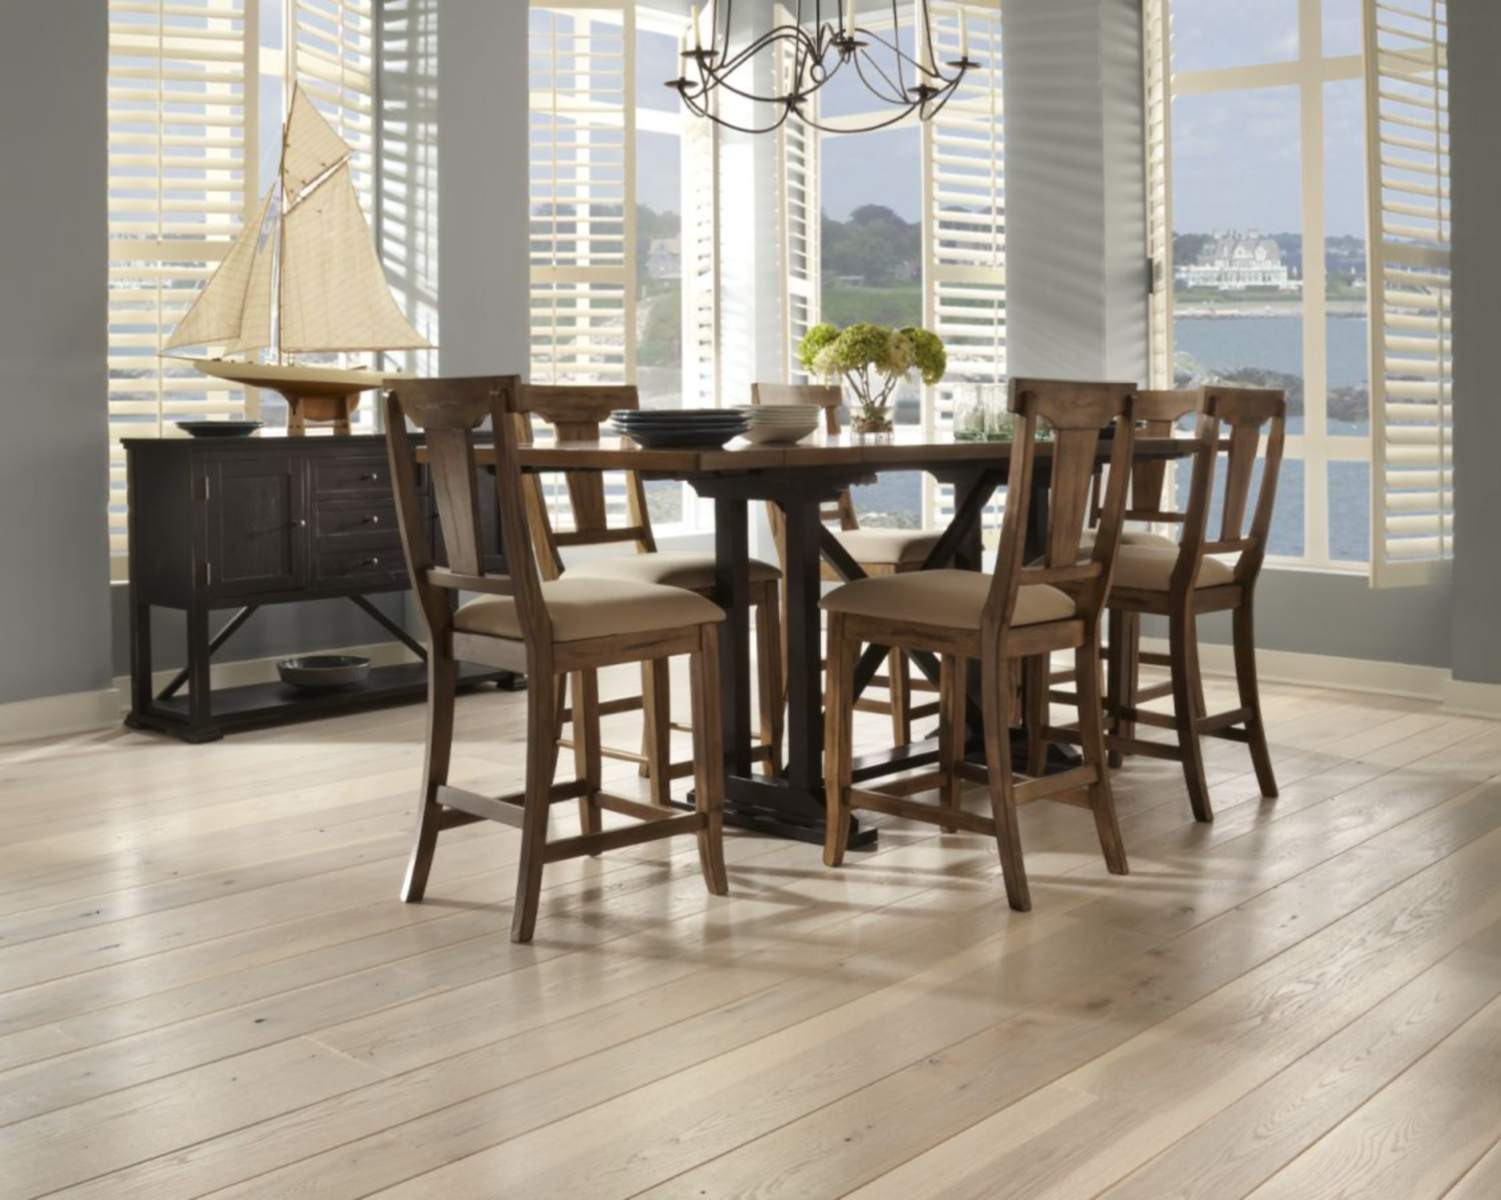 20 Famous Maple Hardwood Flooring Reviews 2022 free download maple hardwood flooring reviews of top 5 brands for solid hardwood flooring in a dining room with carlisle hickorys wide plank flooring